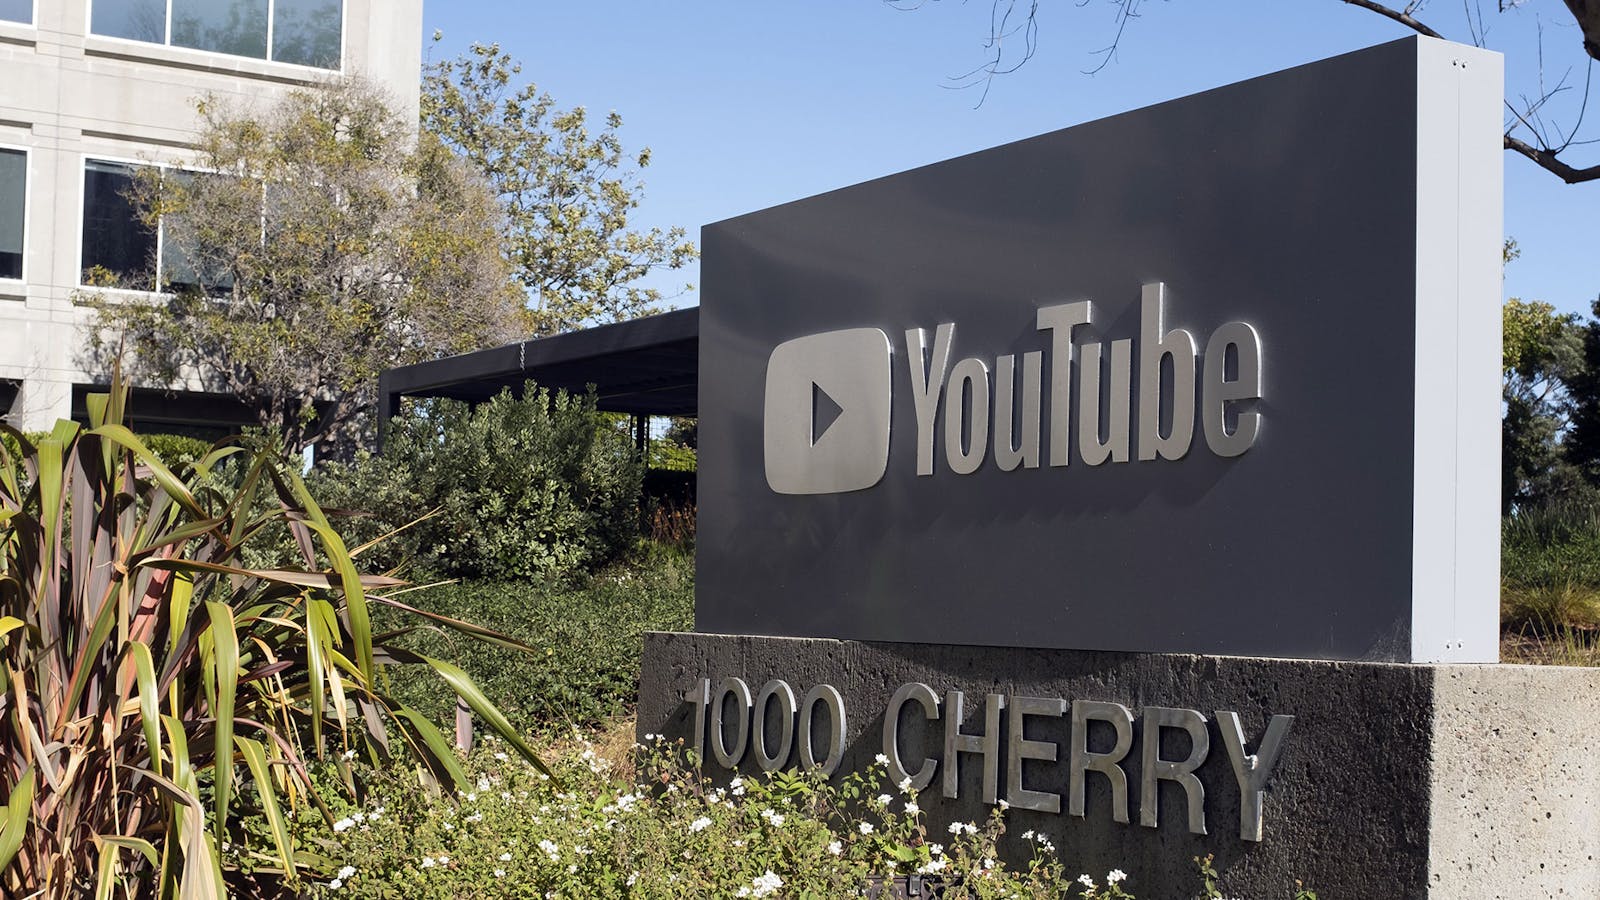 YouTube's office building in San Bruno, Calif. Photo by AP.